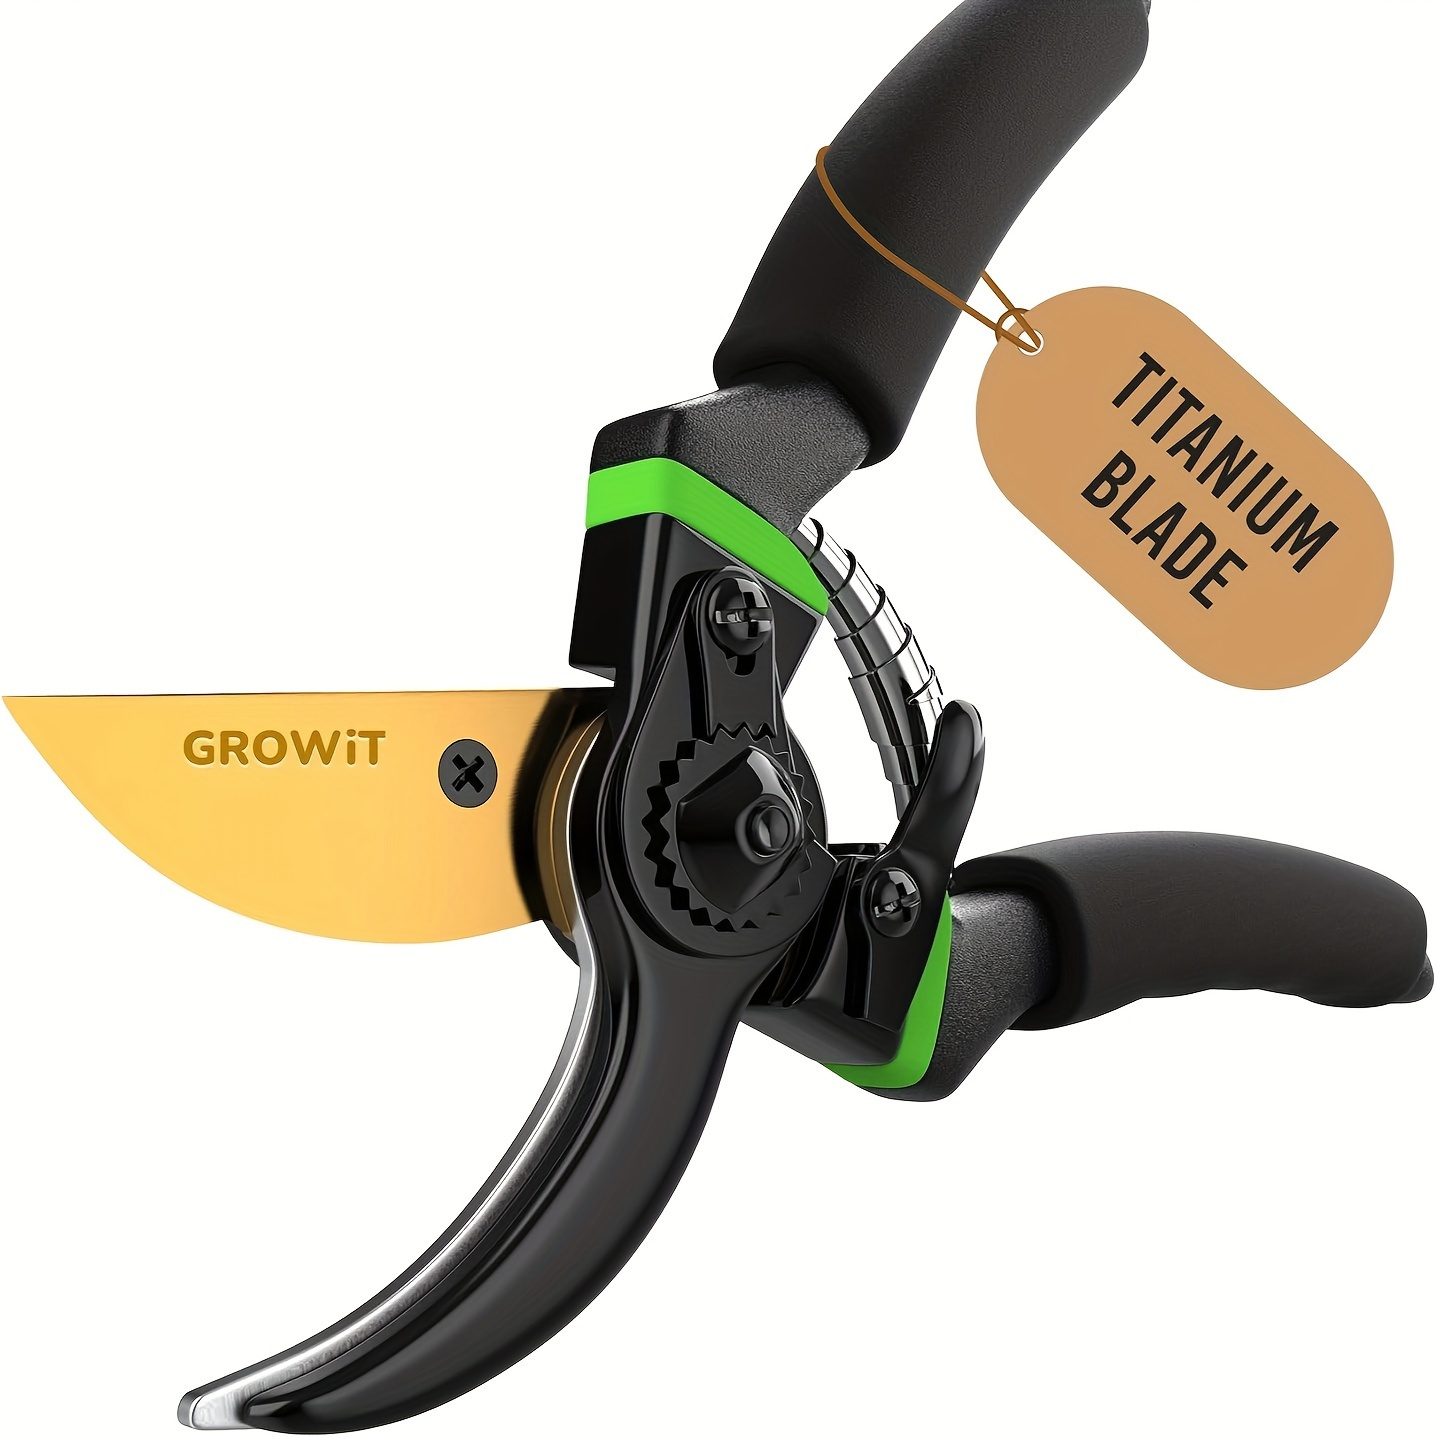 

1 Pc Premium Bypass Pruning Shears, Heavy Duty Ultra Sharp Hand Pruners, Professional Garden Scissors, Rose Clippers For Plants And Tree Ttrimmers, Multipurpose Garden Shears For Gardening